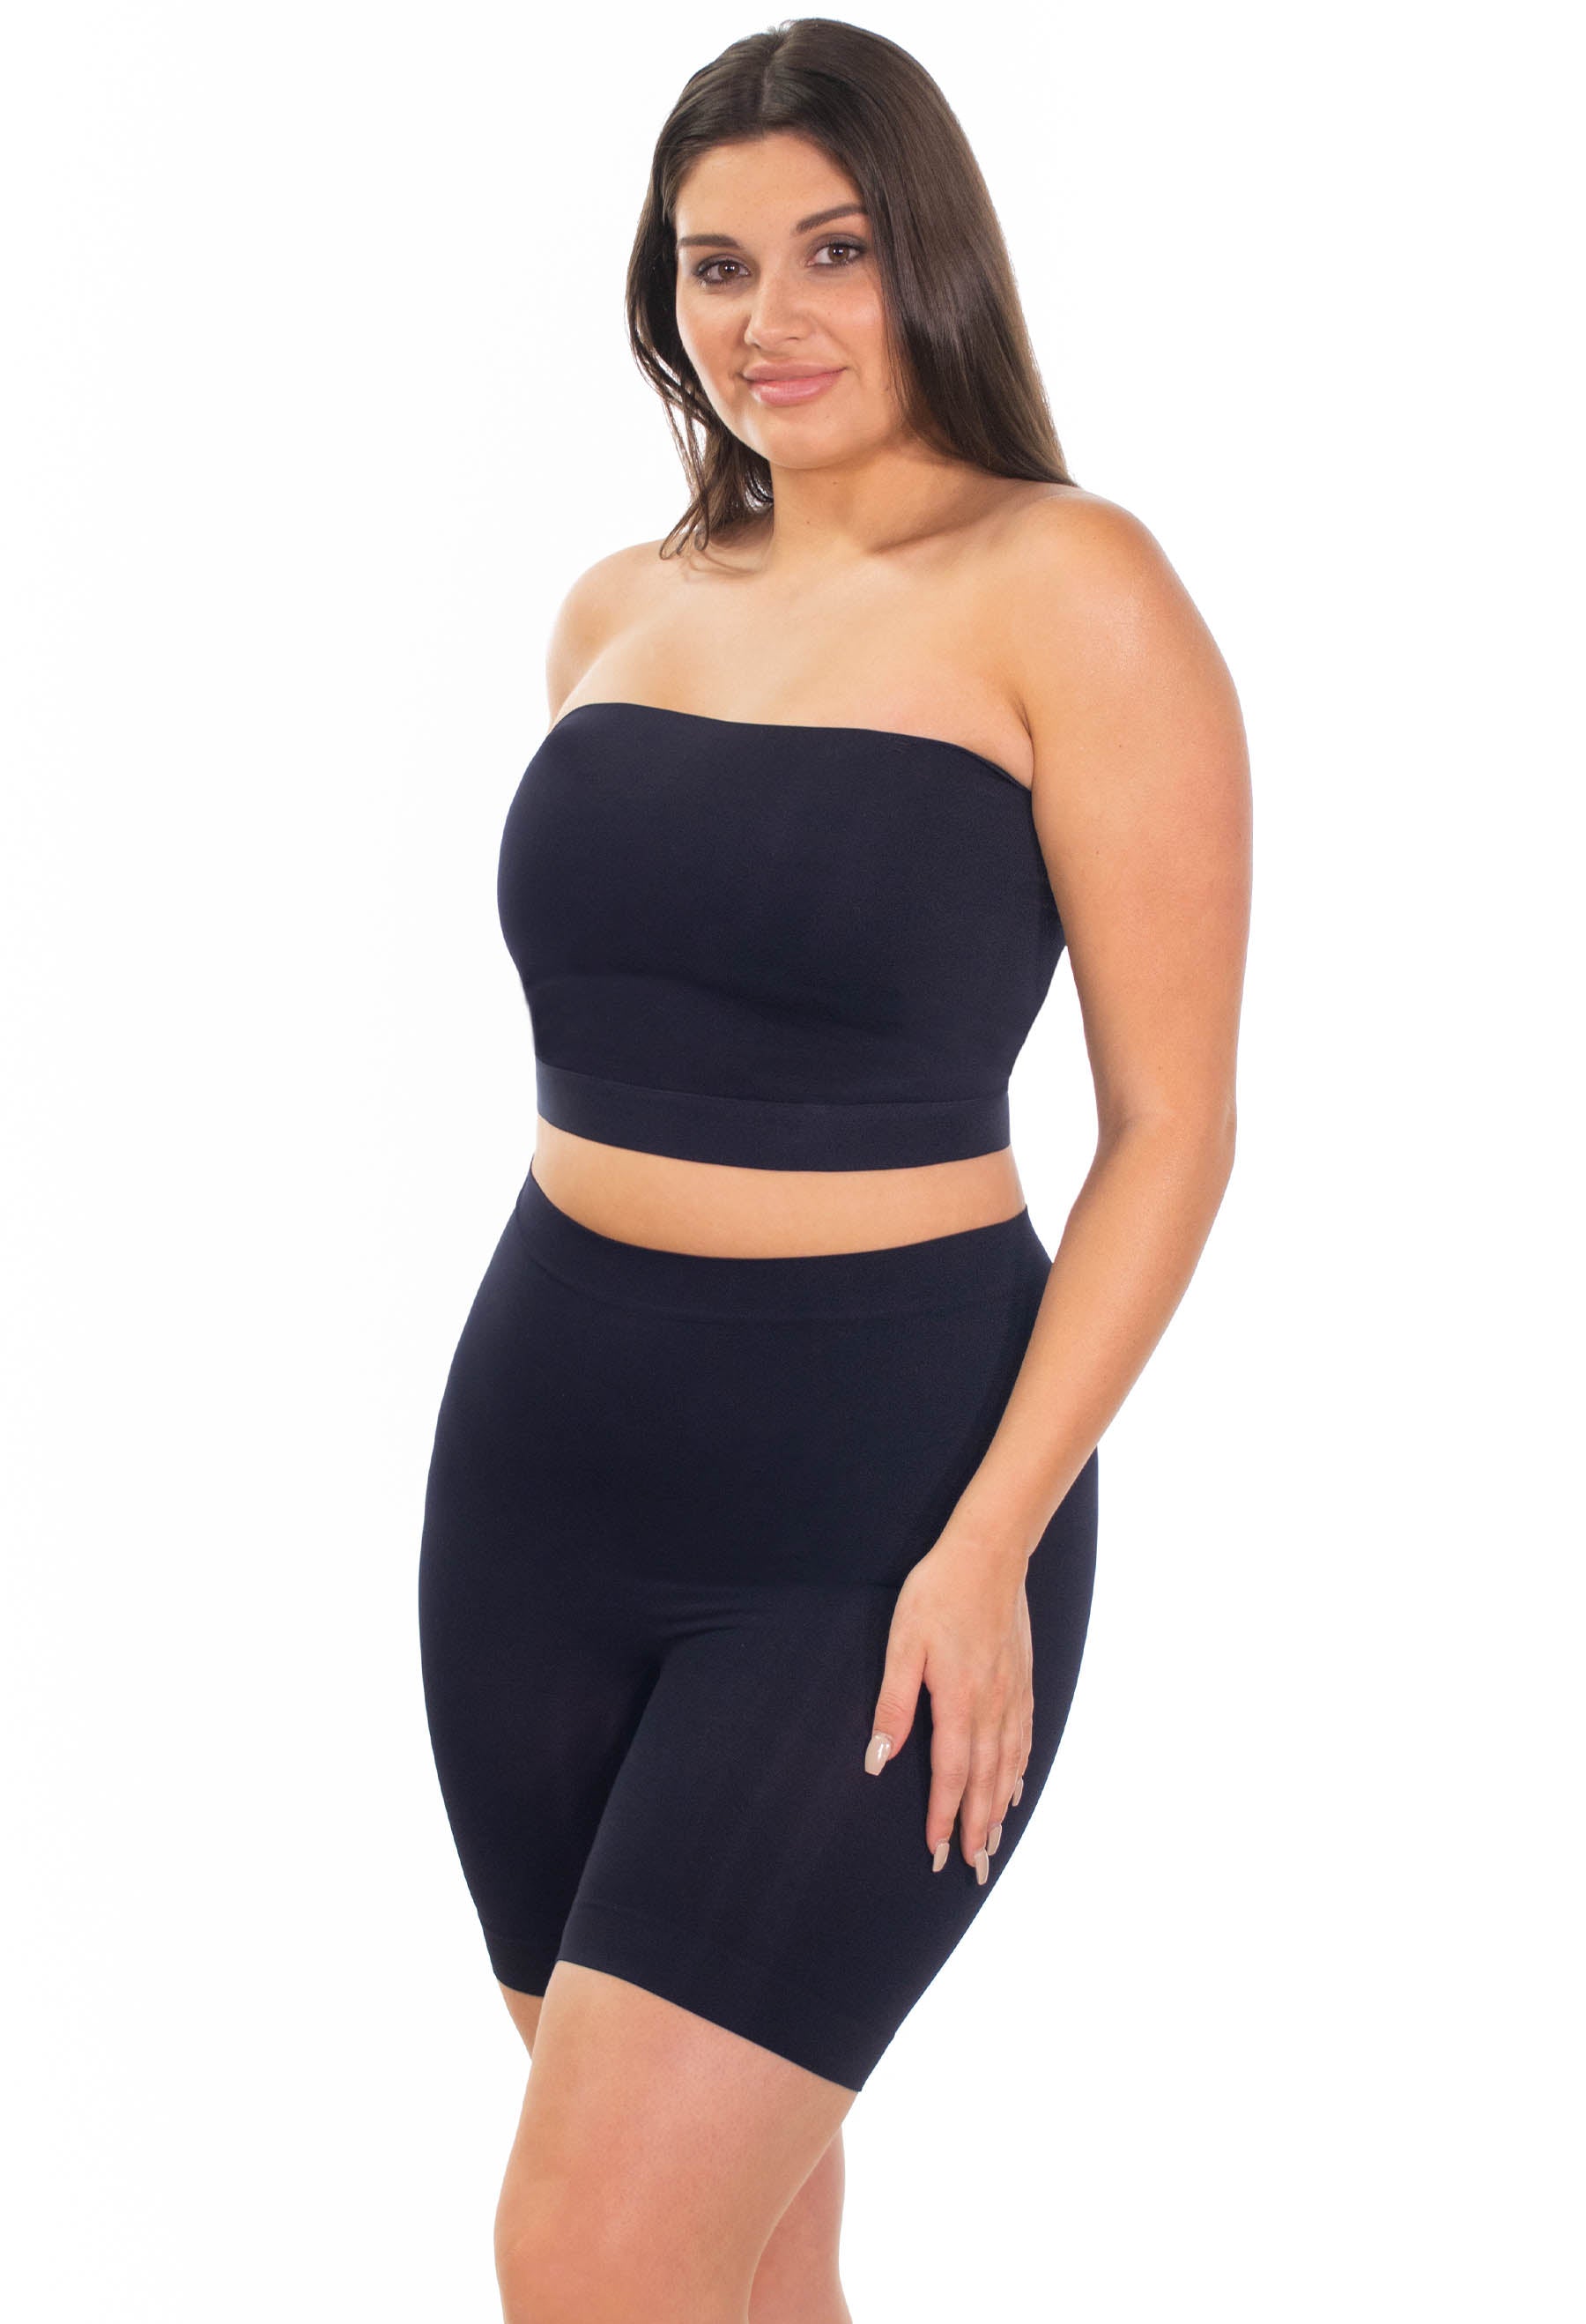 Check out this Compression Bandeau Bra 👌🏽🤩 #compressionbra  #compressionbandeau #bandeau #straplessbra #bandeautop #straplessdres